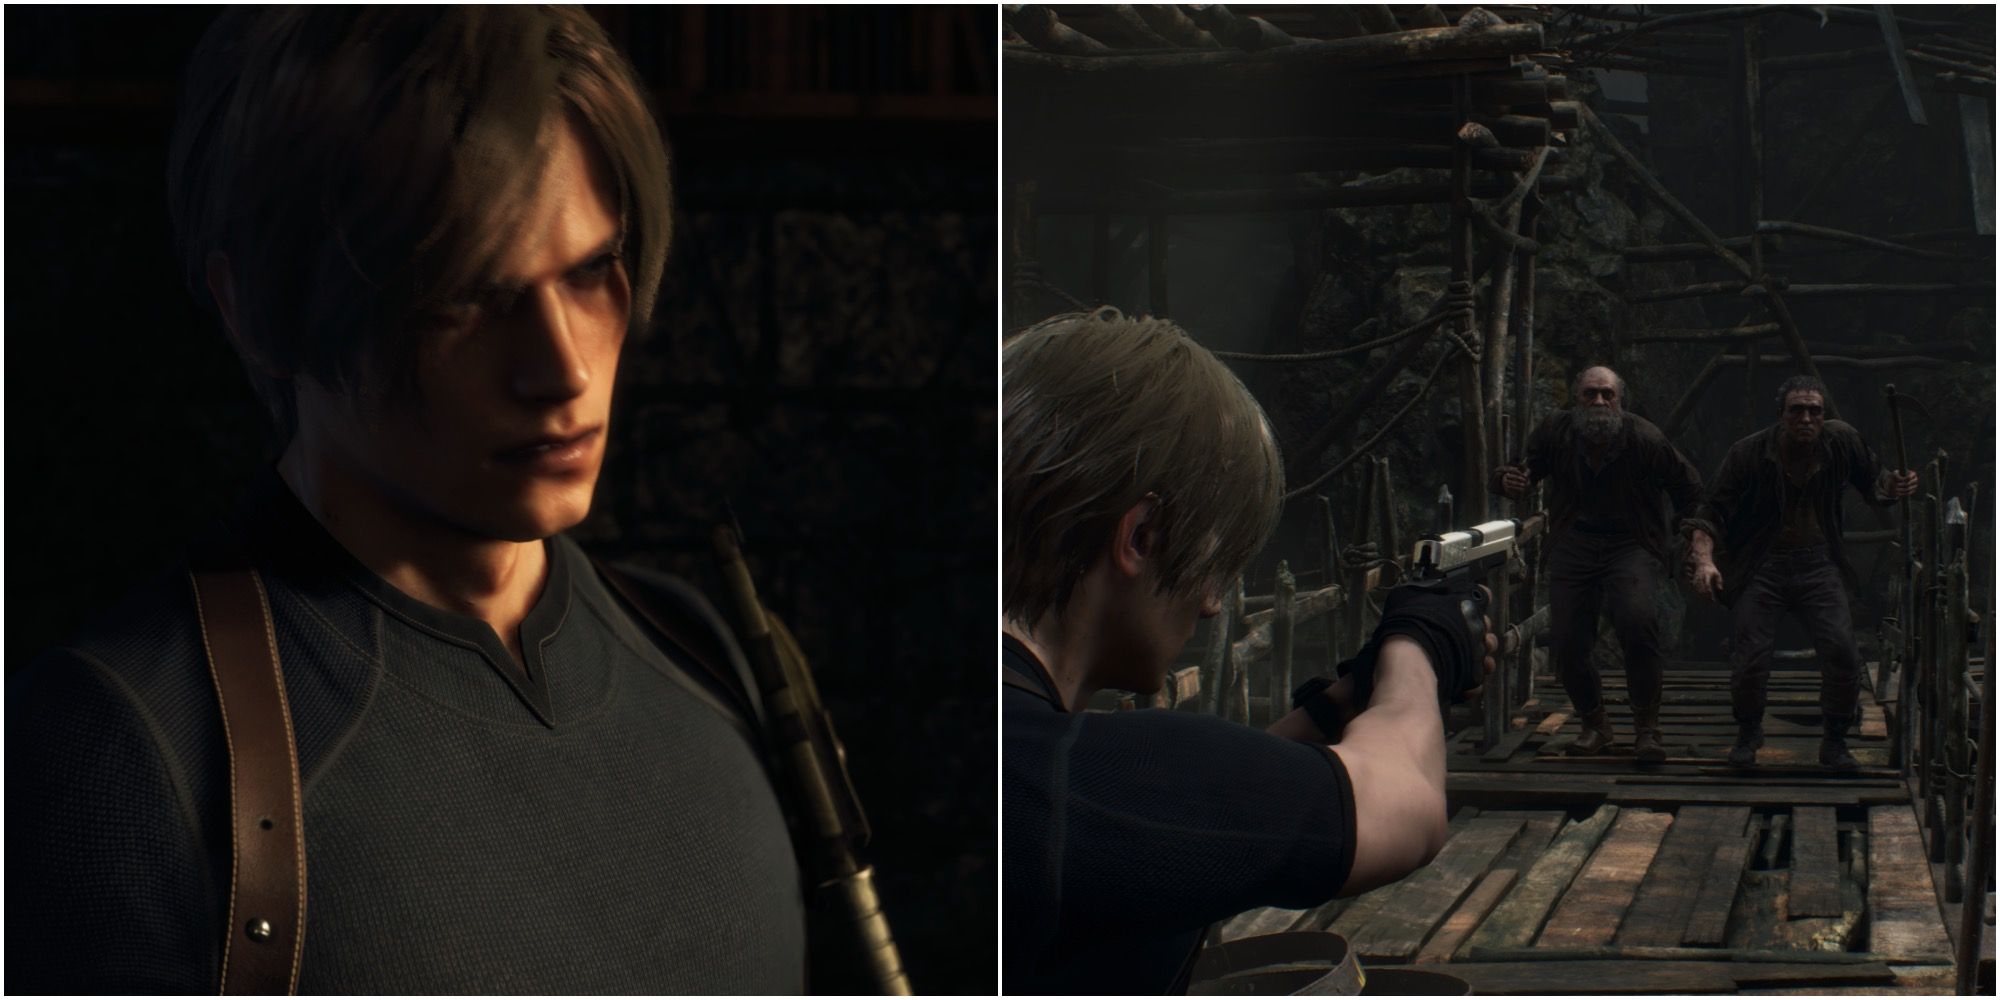 Resident Evil 4 Remake Guide: Walkthrough, Tips and Tricks, and All  Collectibles